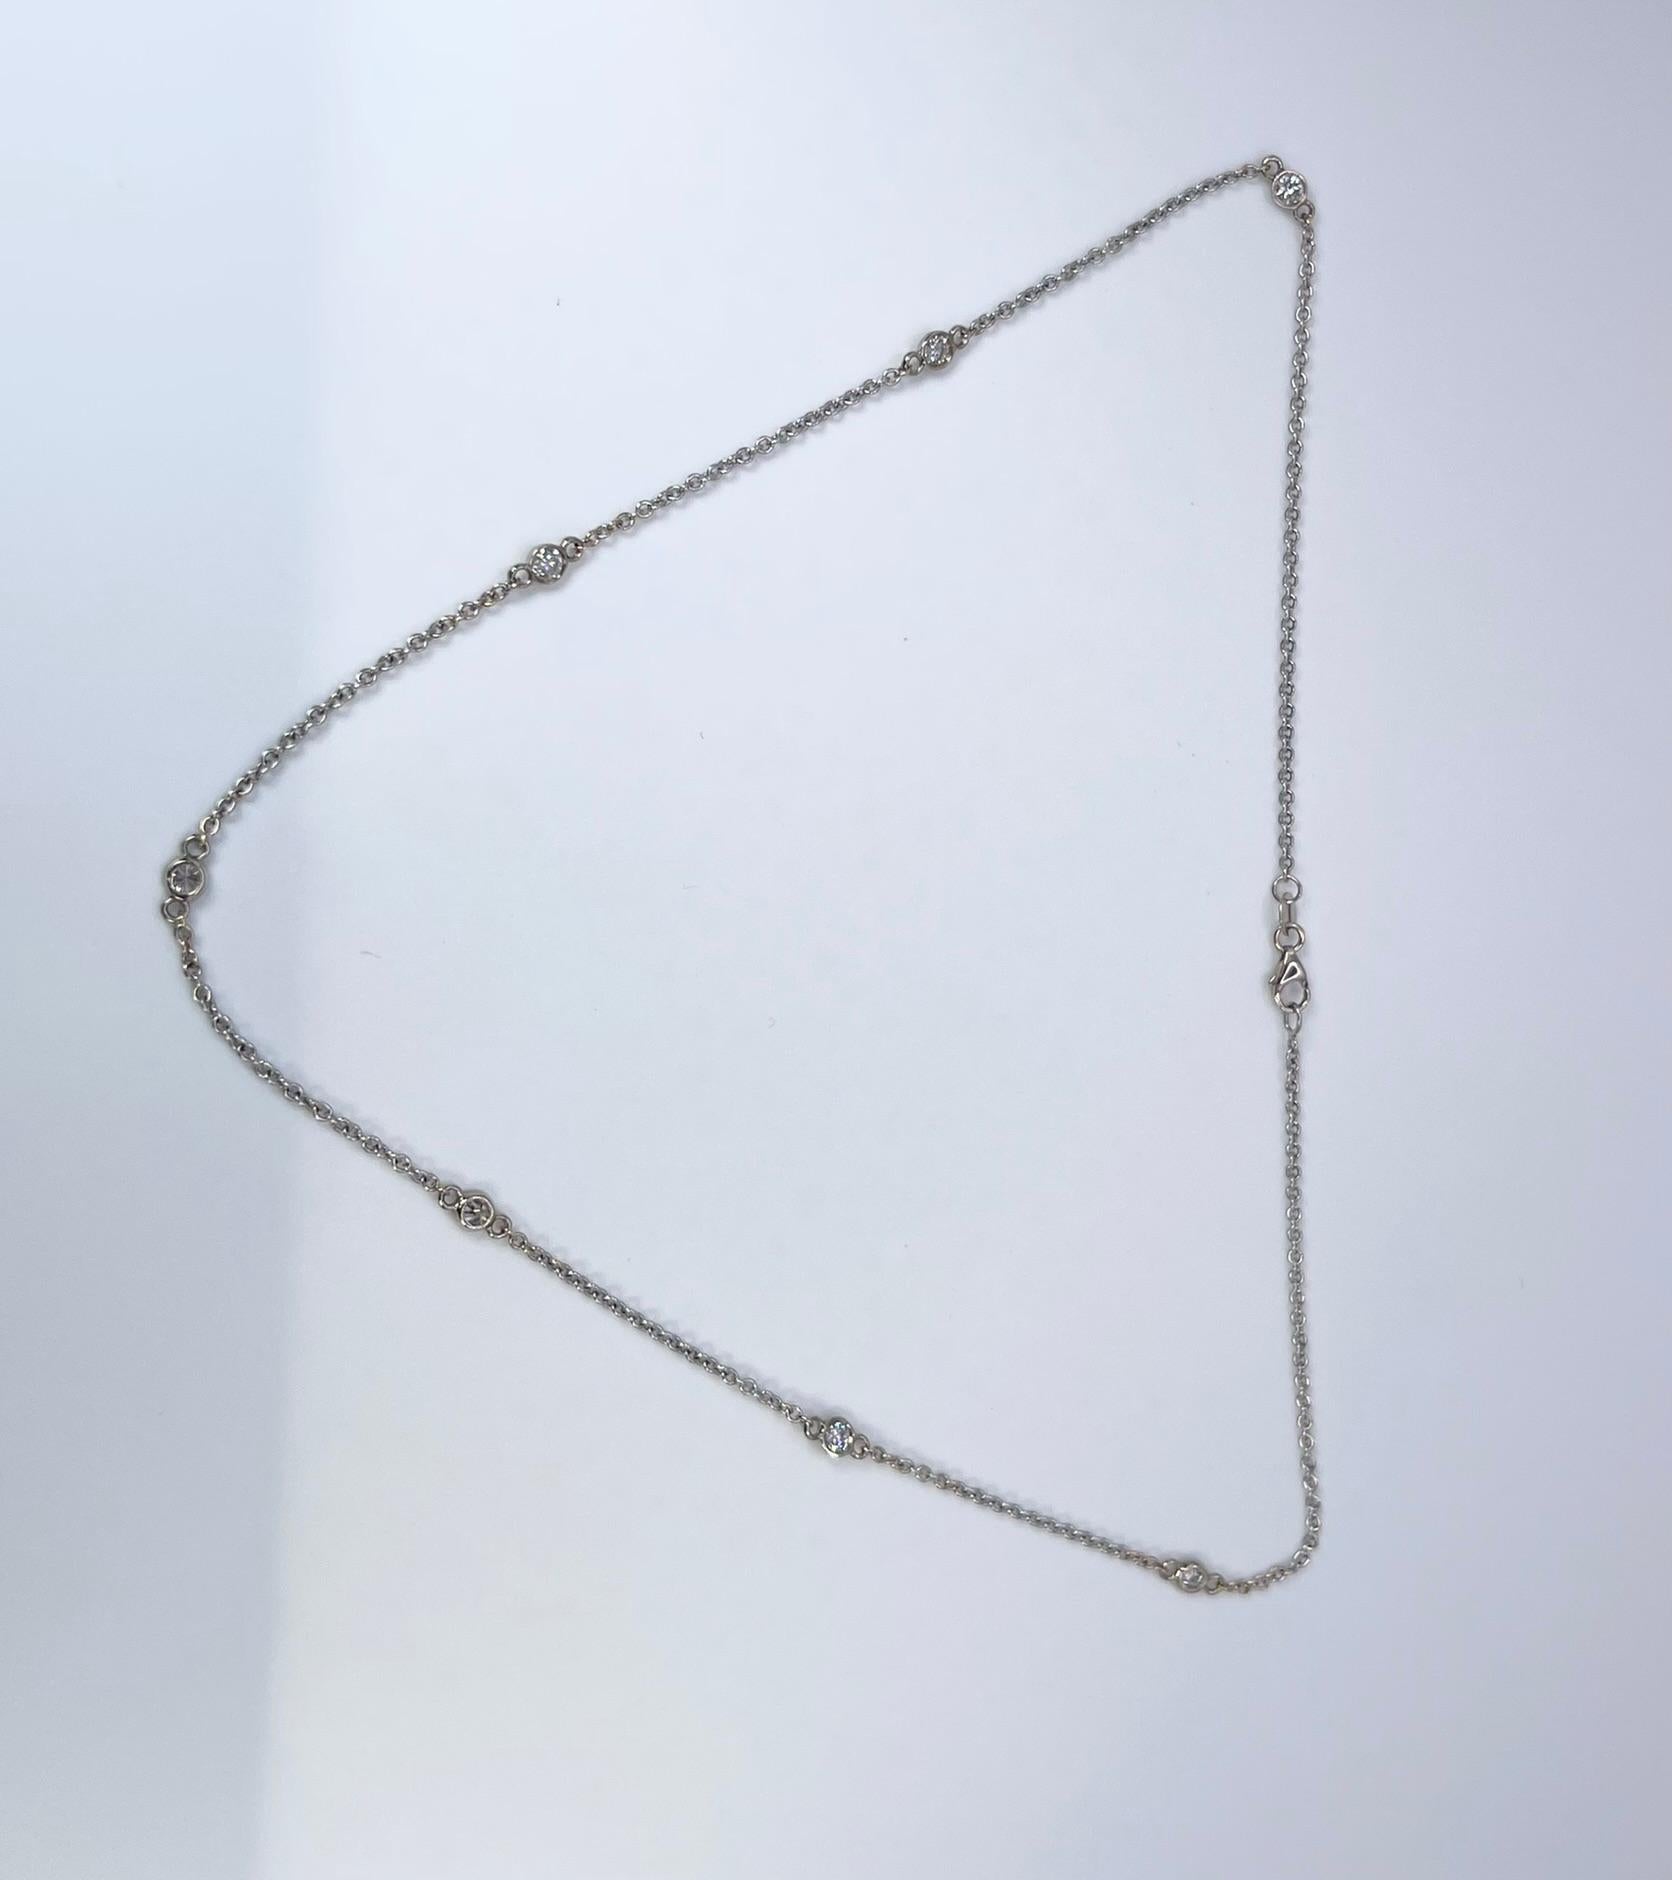 Stunning diamonds by the yard necklace, adjustable from 16-18-20